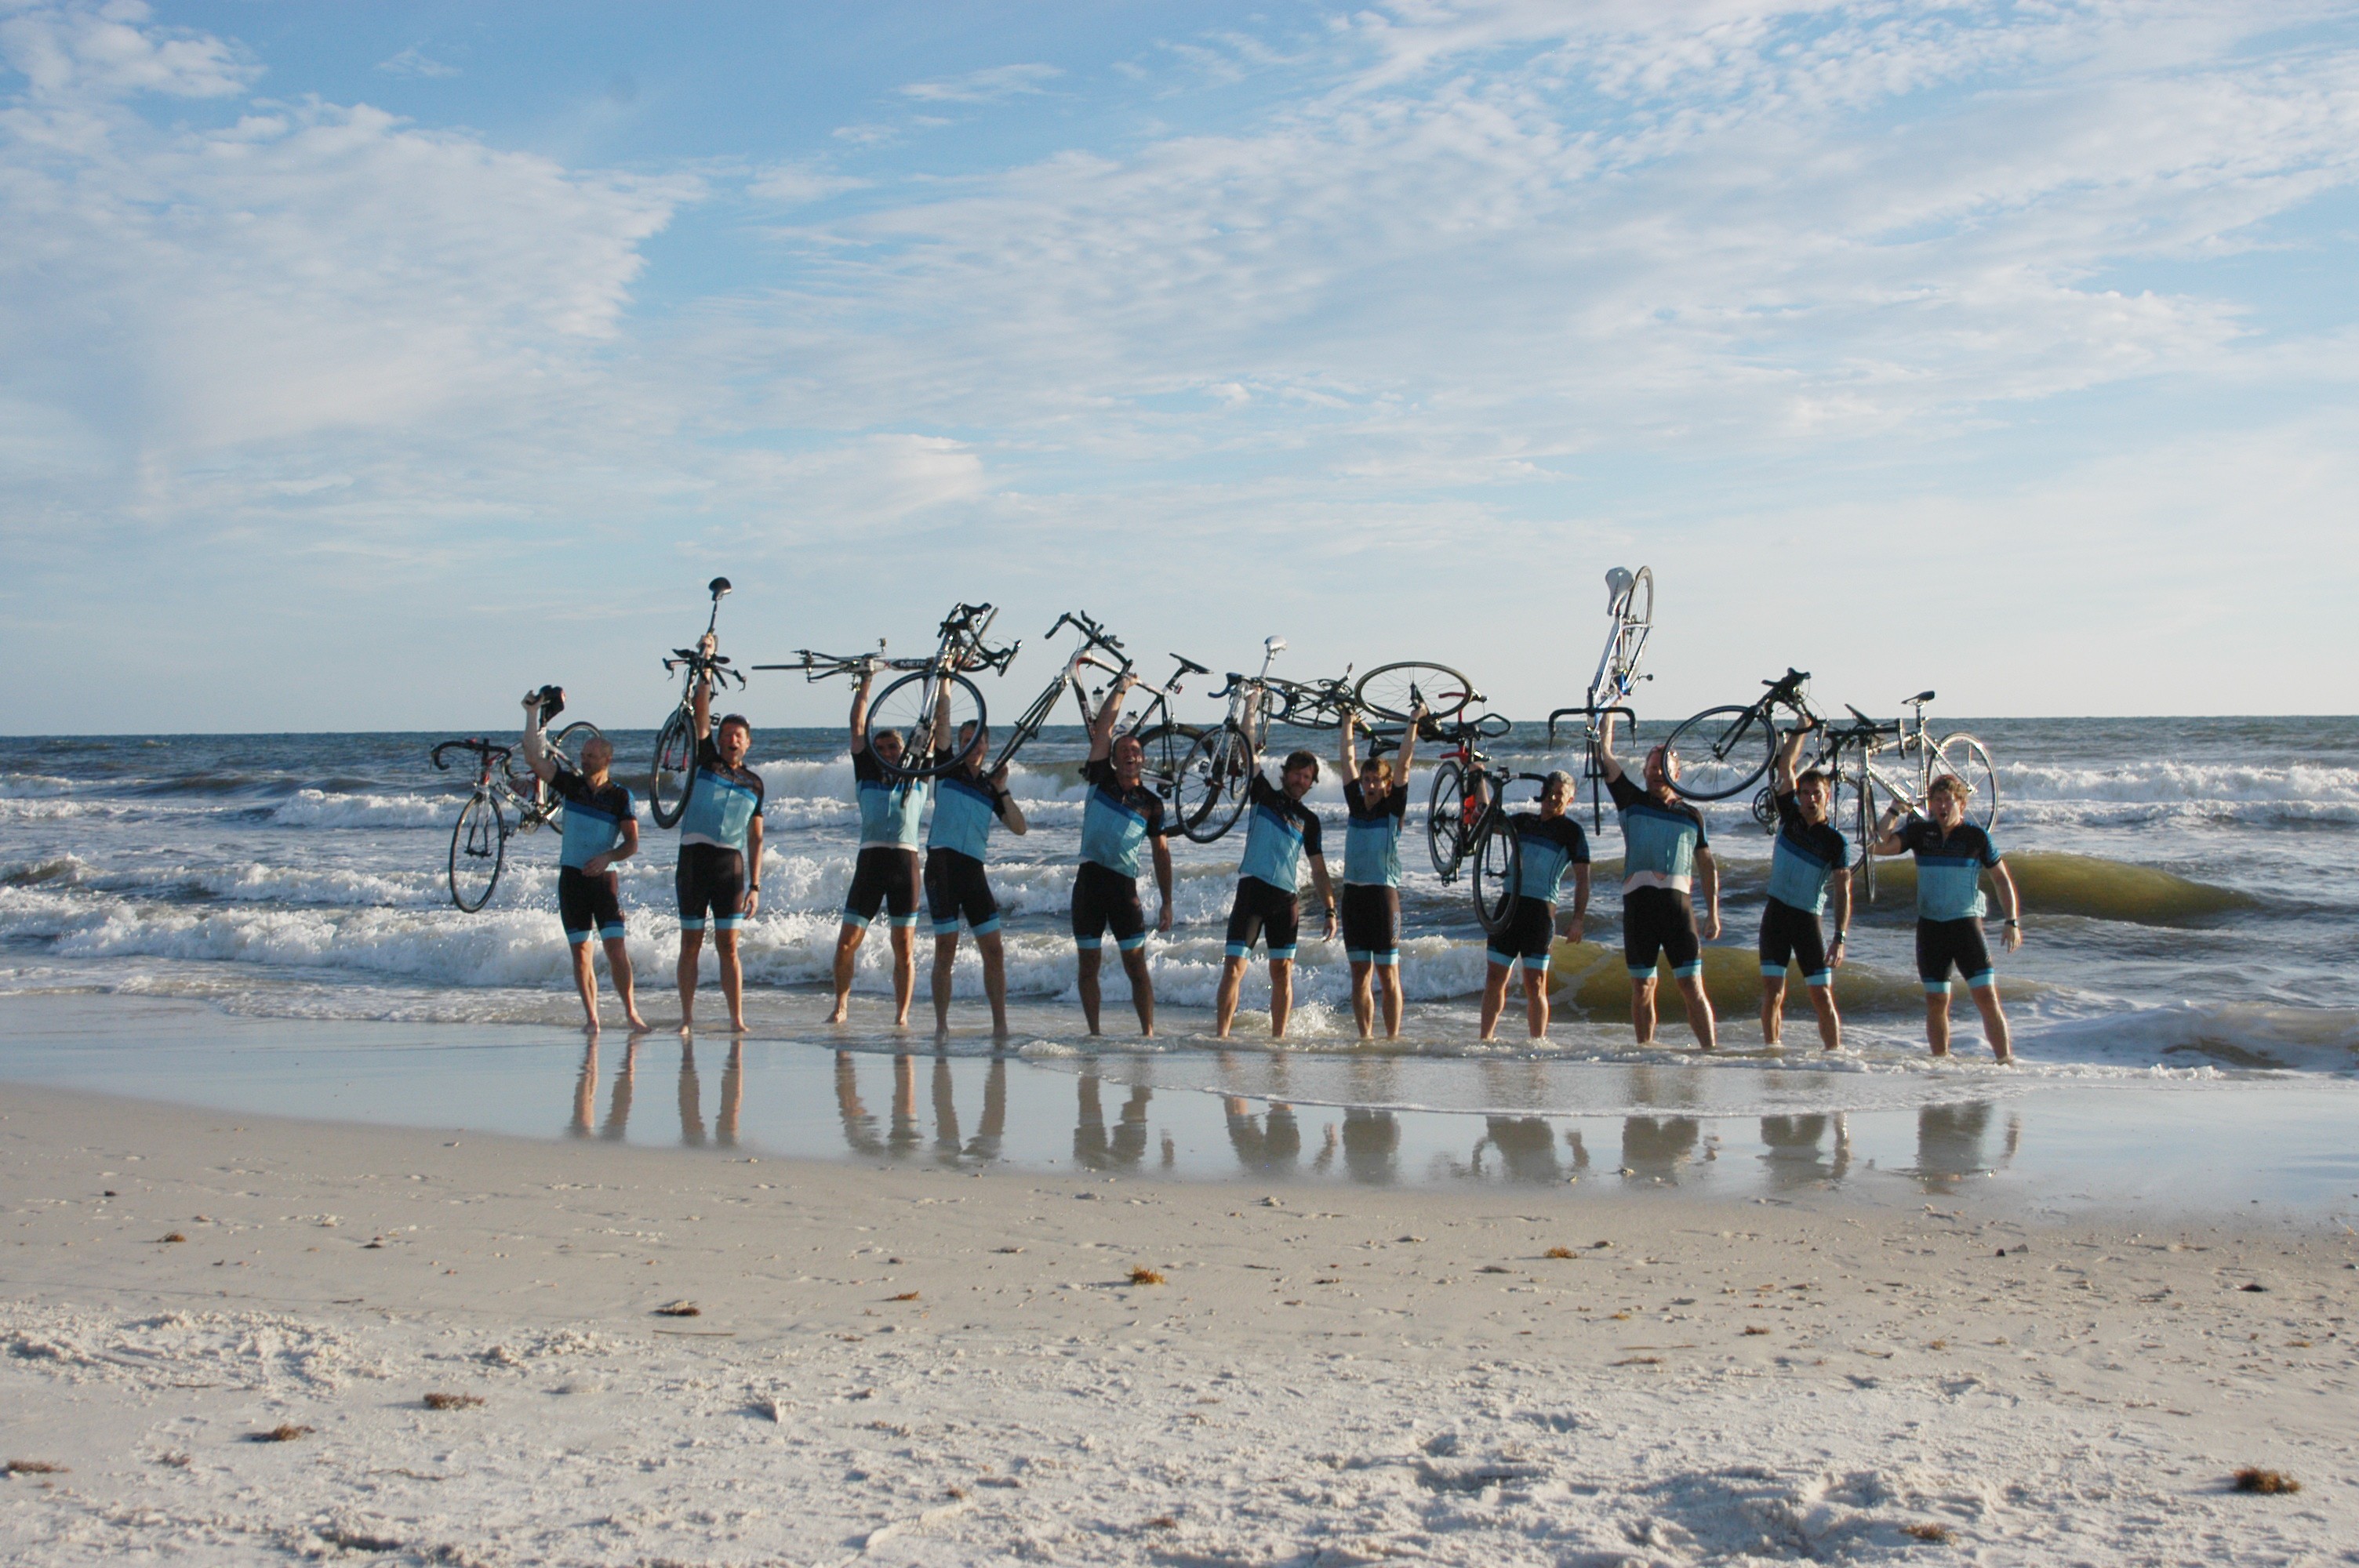 Riders lift their bikes in triumph after finishing a 500-mile bike ride from Memphis to a Florida beach
that raised money for and awareness of breast cancer. Dr. Brad Adkins is second from the right; Womans Clinic Administrator Jon Ewing is next to him, at far right.